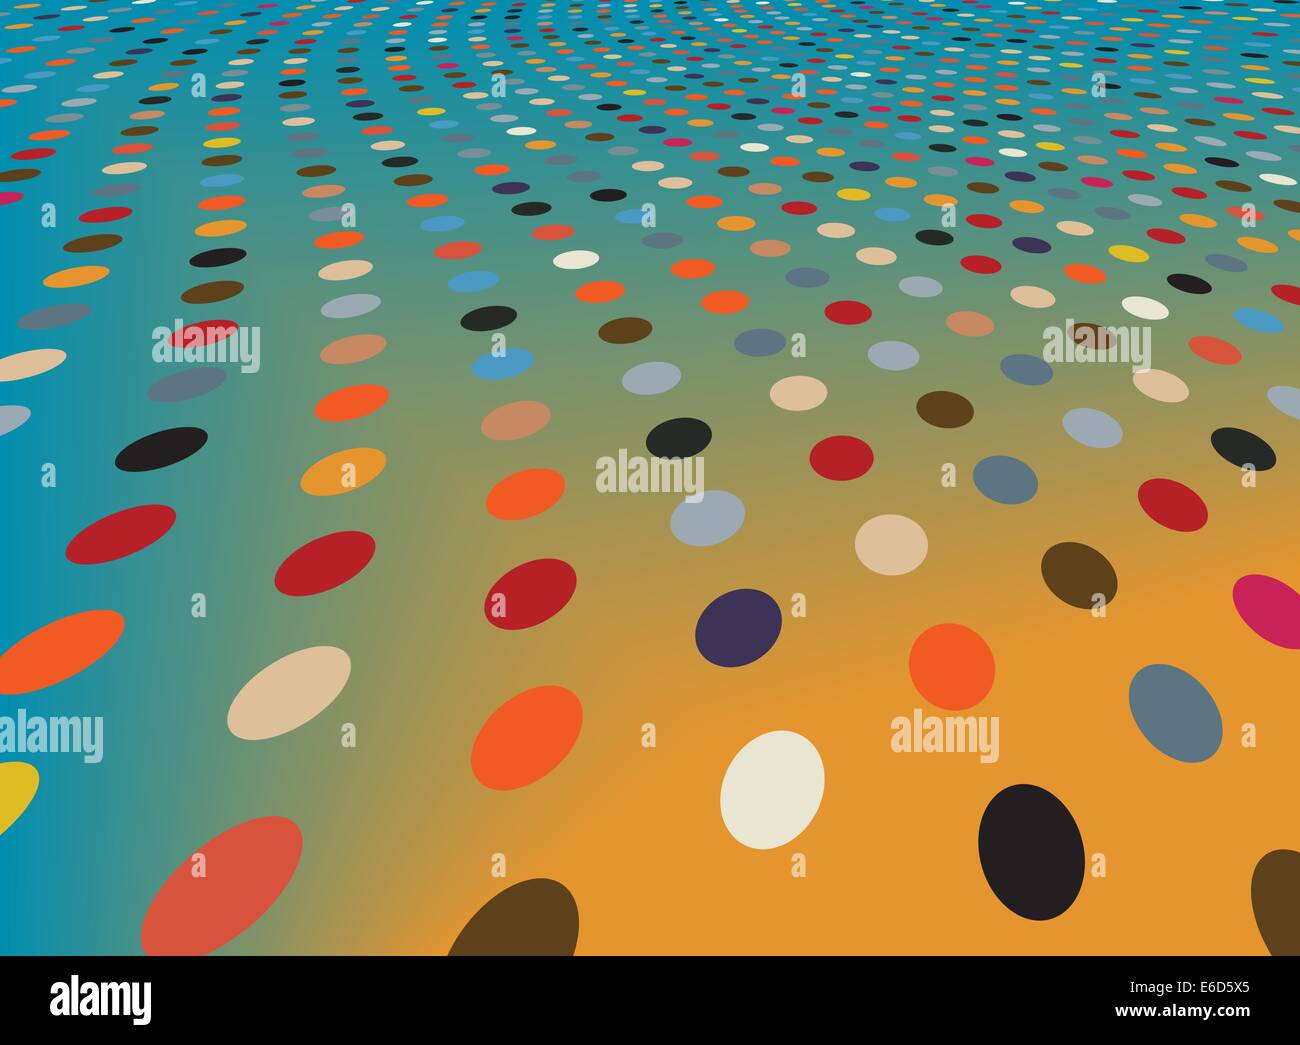 Colorful abstract illustrated design of dots Stock Vector